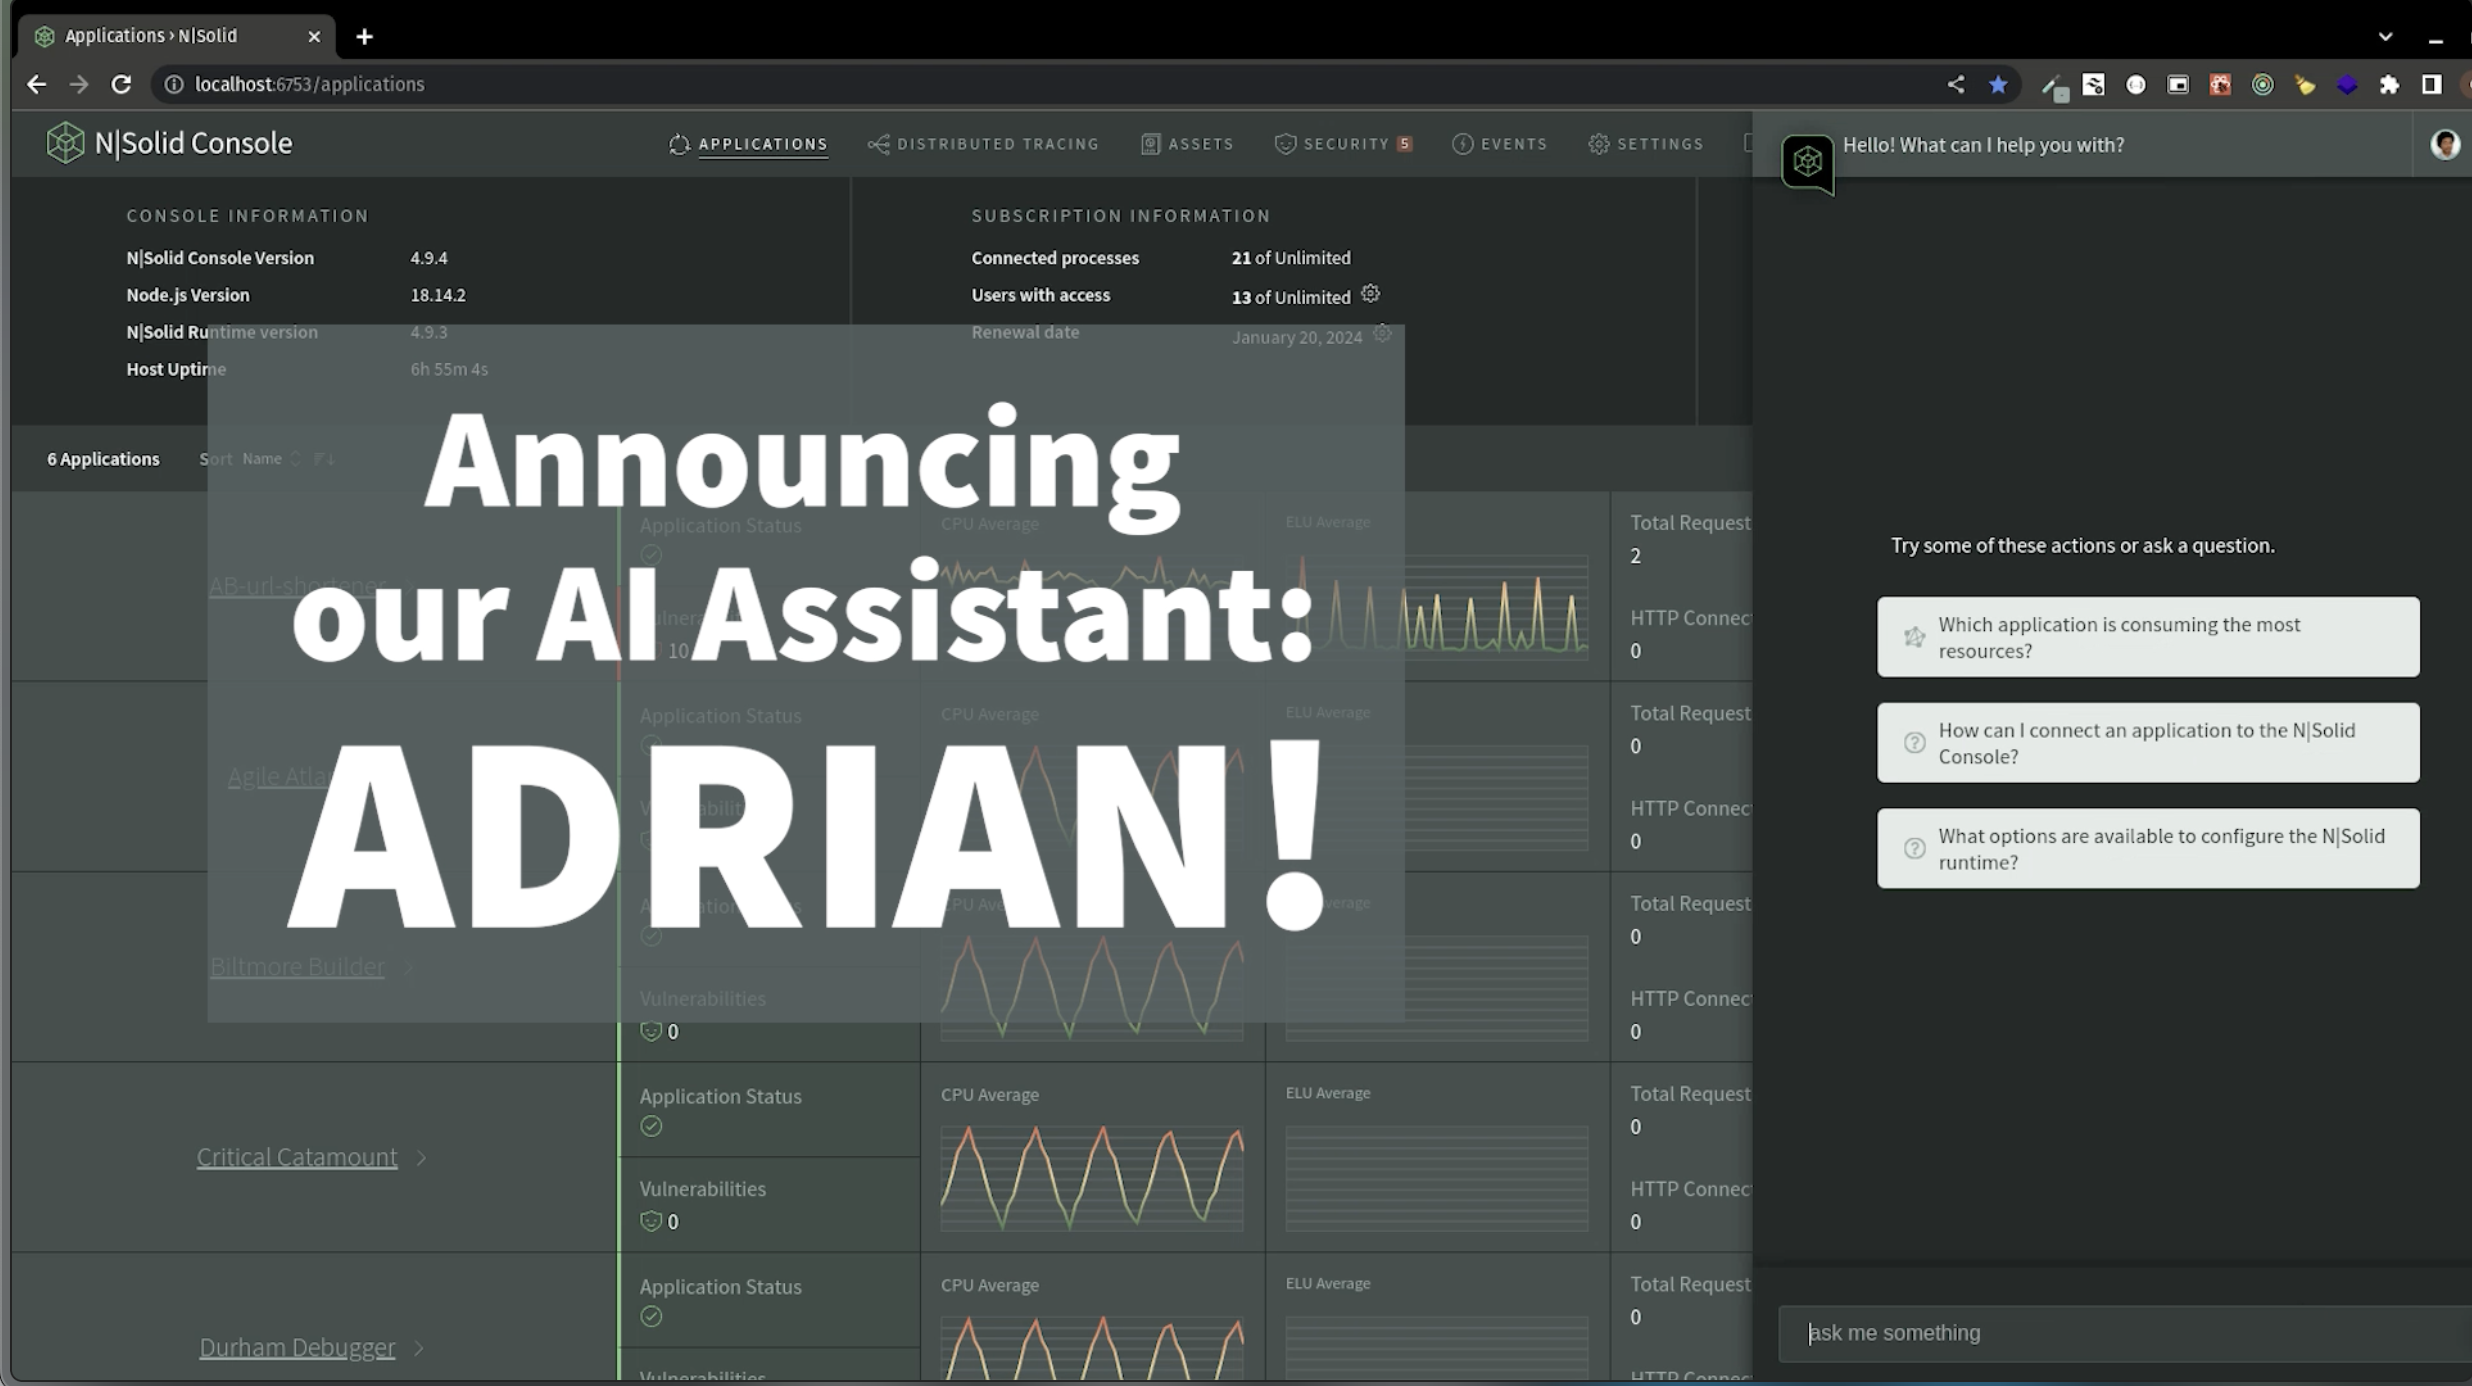 NSolid-Adrian-AI-Assistant